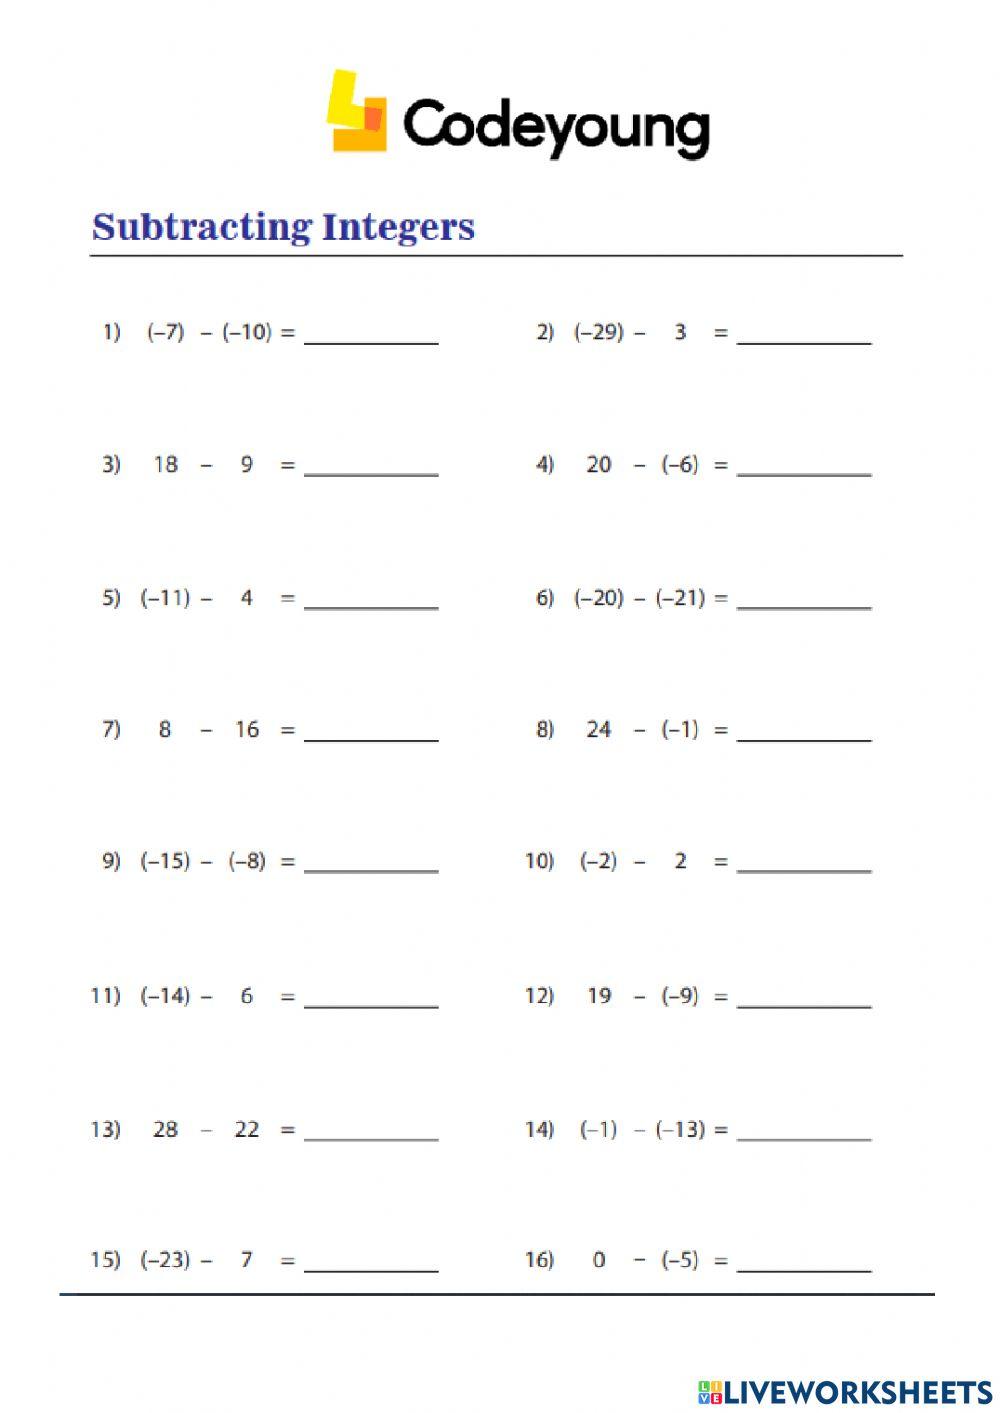 An Introduction to Subtraction of Integers Concept CW